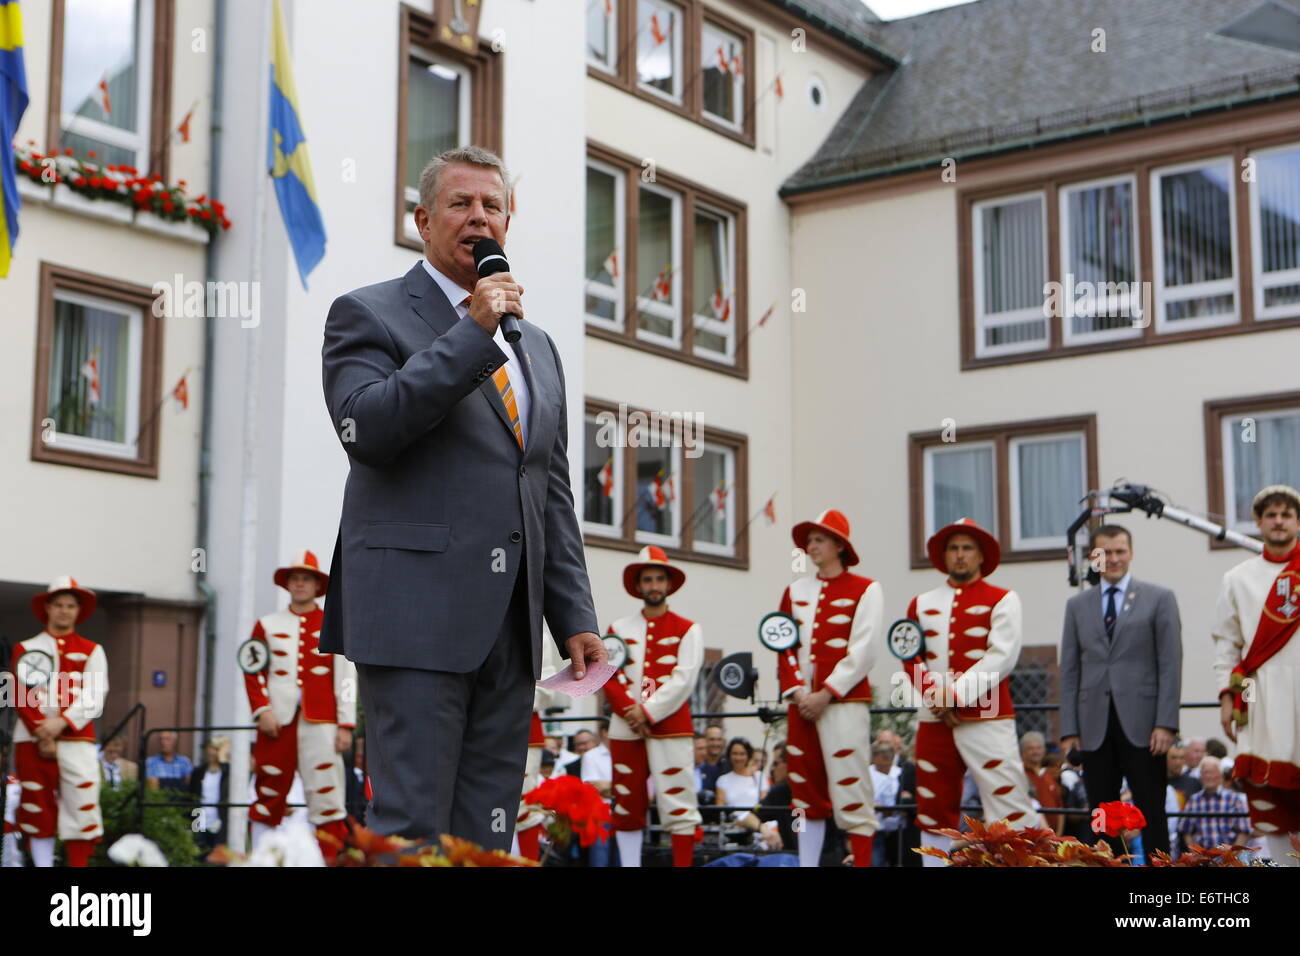 Germany. 30th Aug, 2014. The Lord Mayor of Worms, Michael Kissel (SPD), addresses the opening ceremony of the Backfischfest 2014. The Backfischfest started in Worms with the traditional handing over of power from the Lord Mayor to the Mayor of the FishermenÕs Lea. It is the largest wine fair along the Rhine that includes music and dances. Credit:  Michael Debets/Pacific Press/Alamy Live News Stock Photo